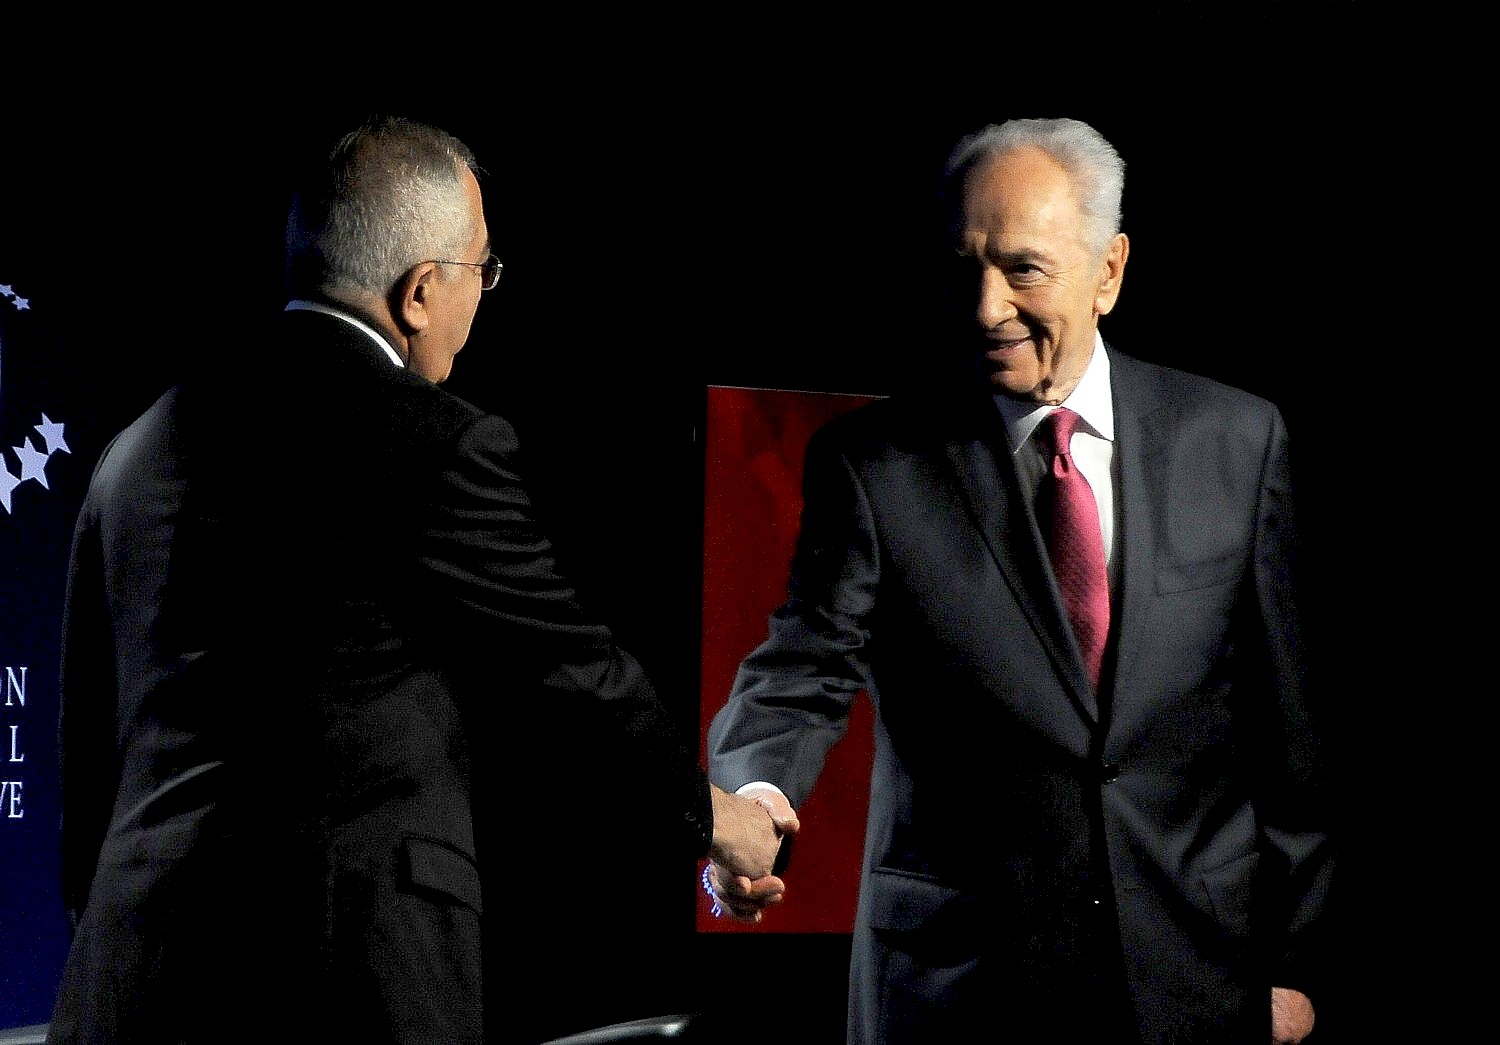 Israel President Shimon Peres greets Palestine National Authority Prime Minister Salam Fayyad at 2010 Clinton Global Initiative. © 2016 Karen Rubin/news-photos-features.com